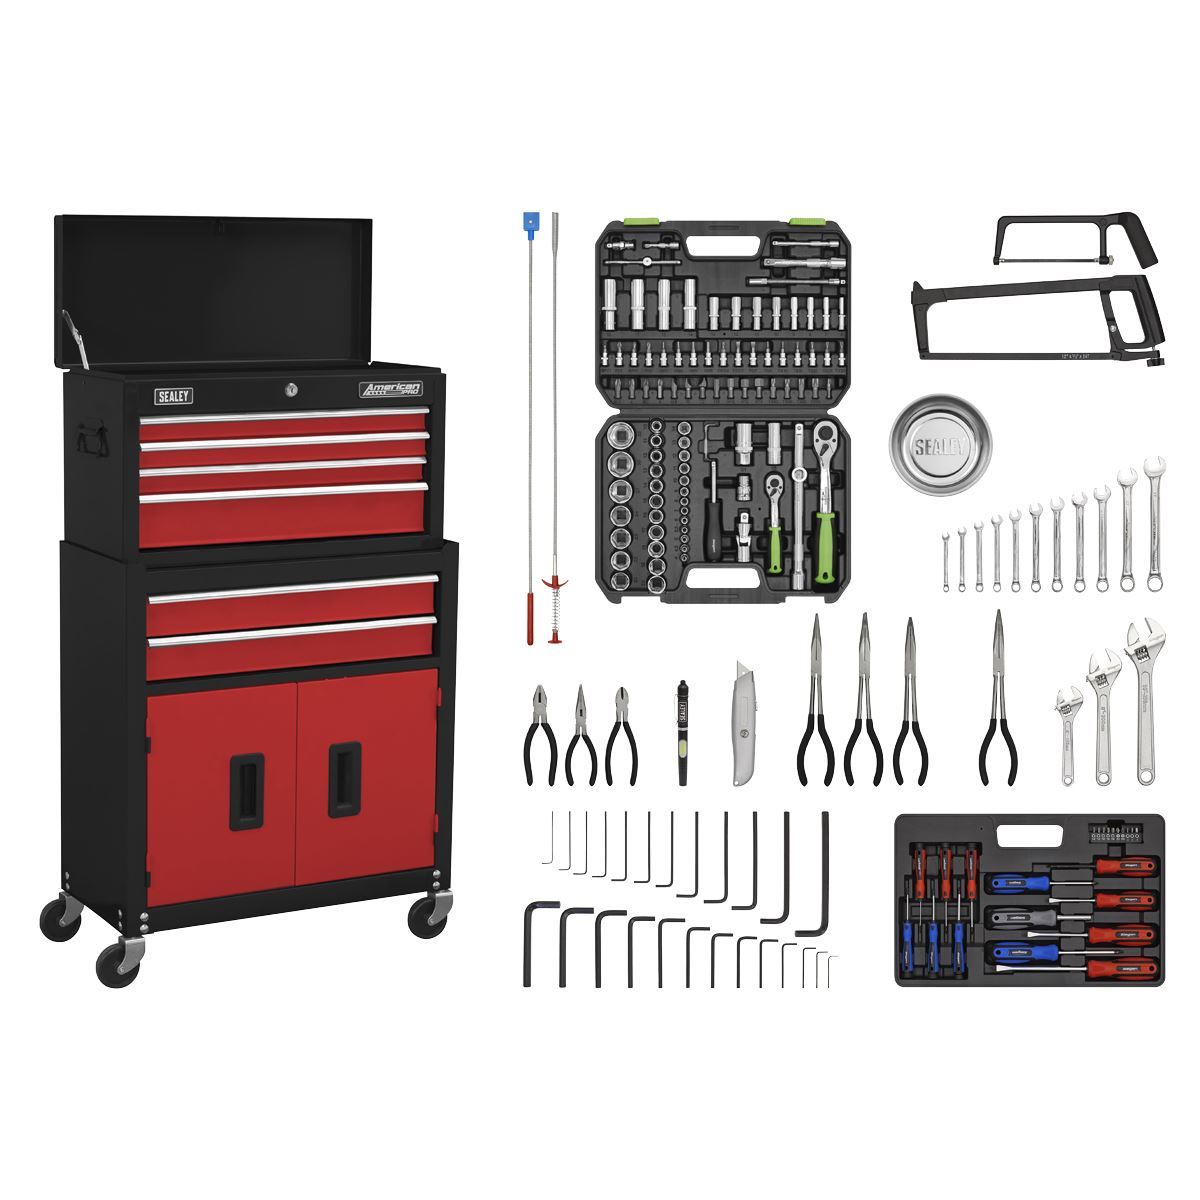 Sealey American Pro Topchest & Rollcab Combination 6 Drawer with Ball-Bearing Slides - Red/Black & 170pc Tool Kit